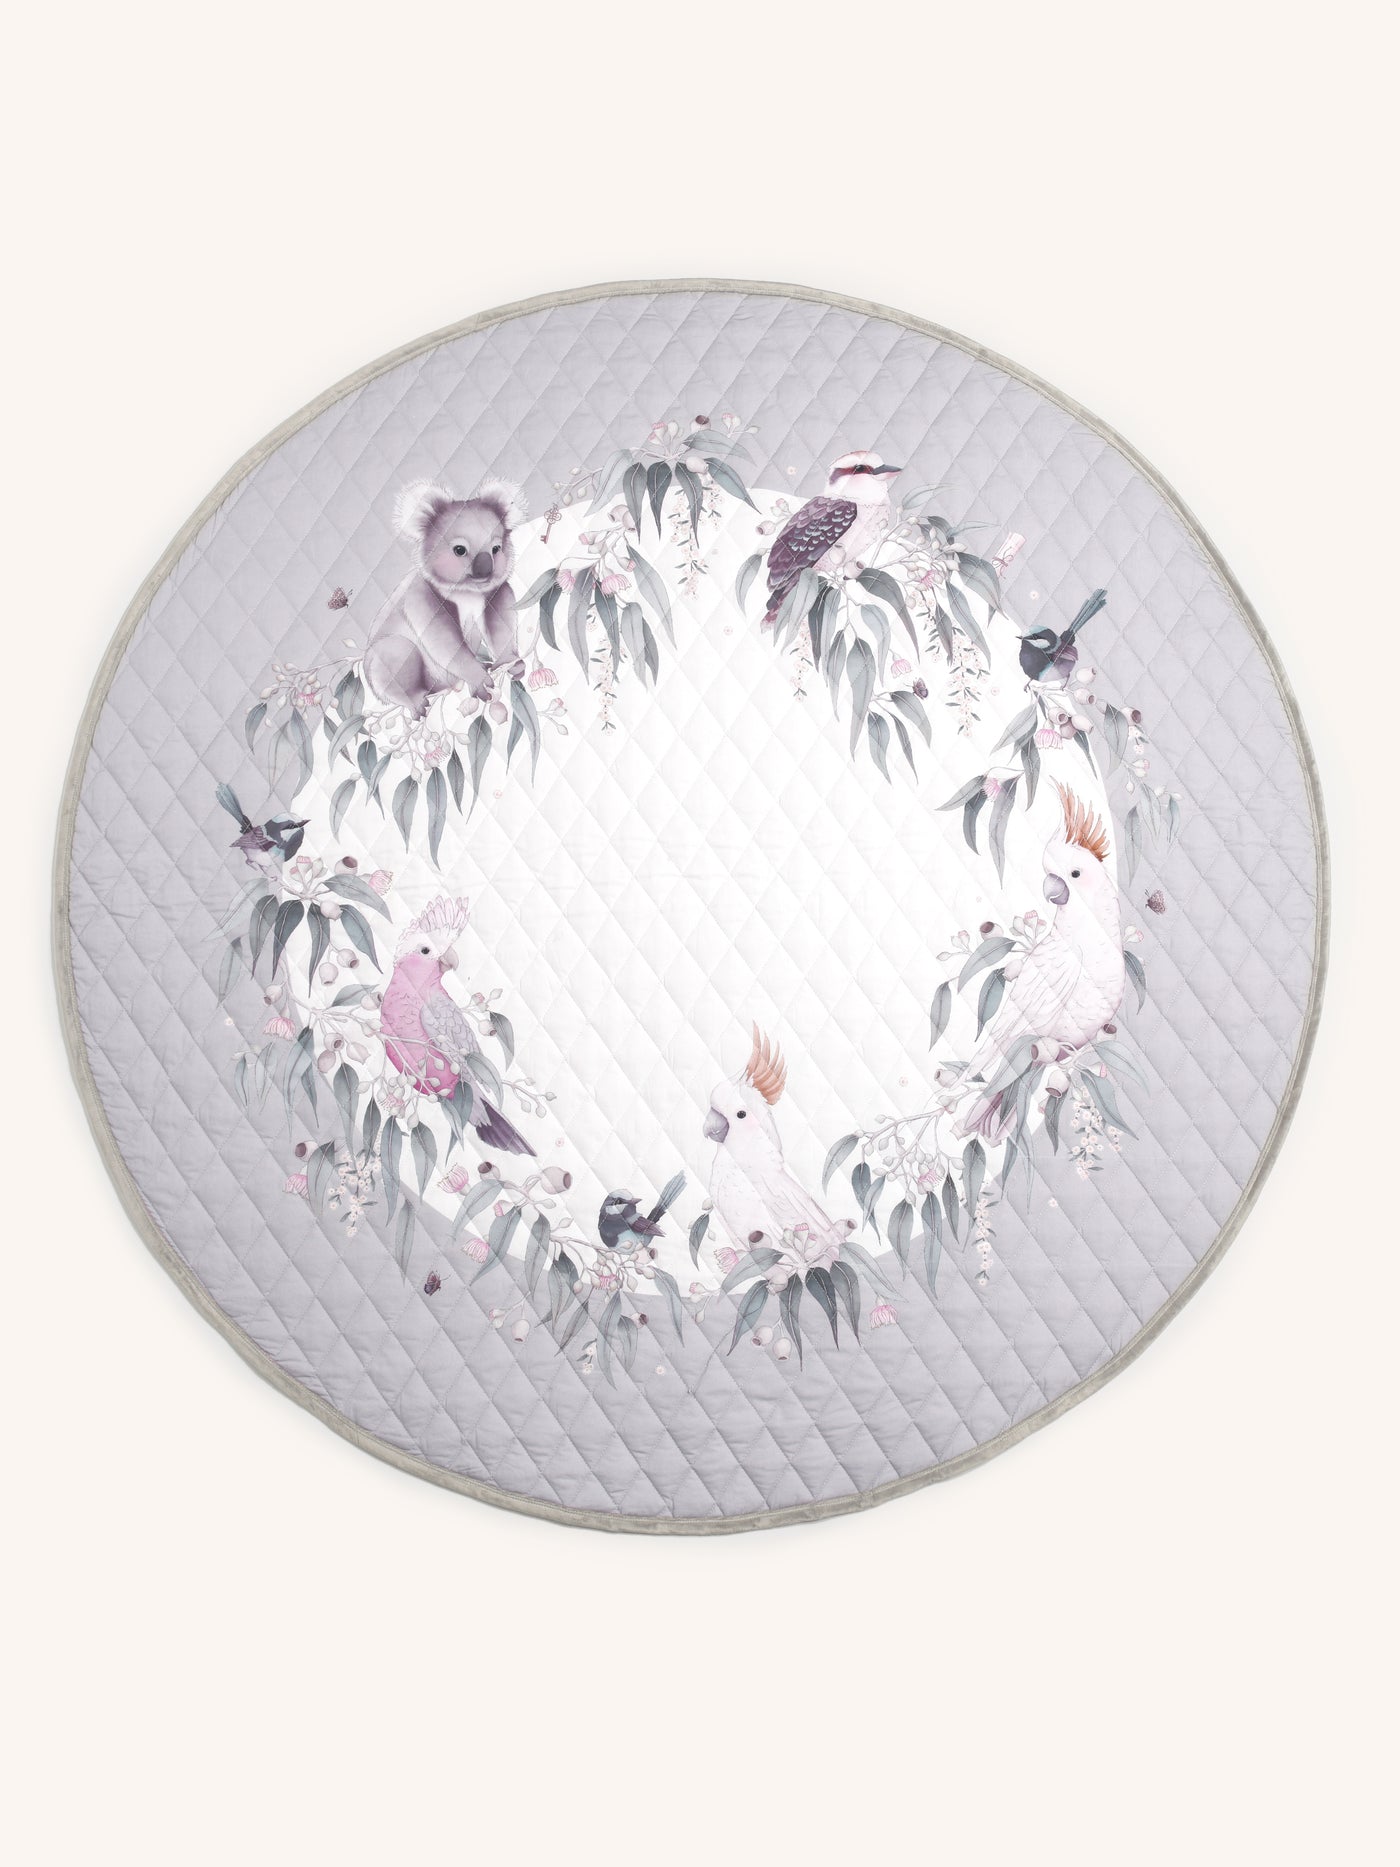 'Bush Babies' Round Quilted Playmat